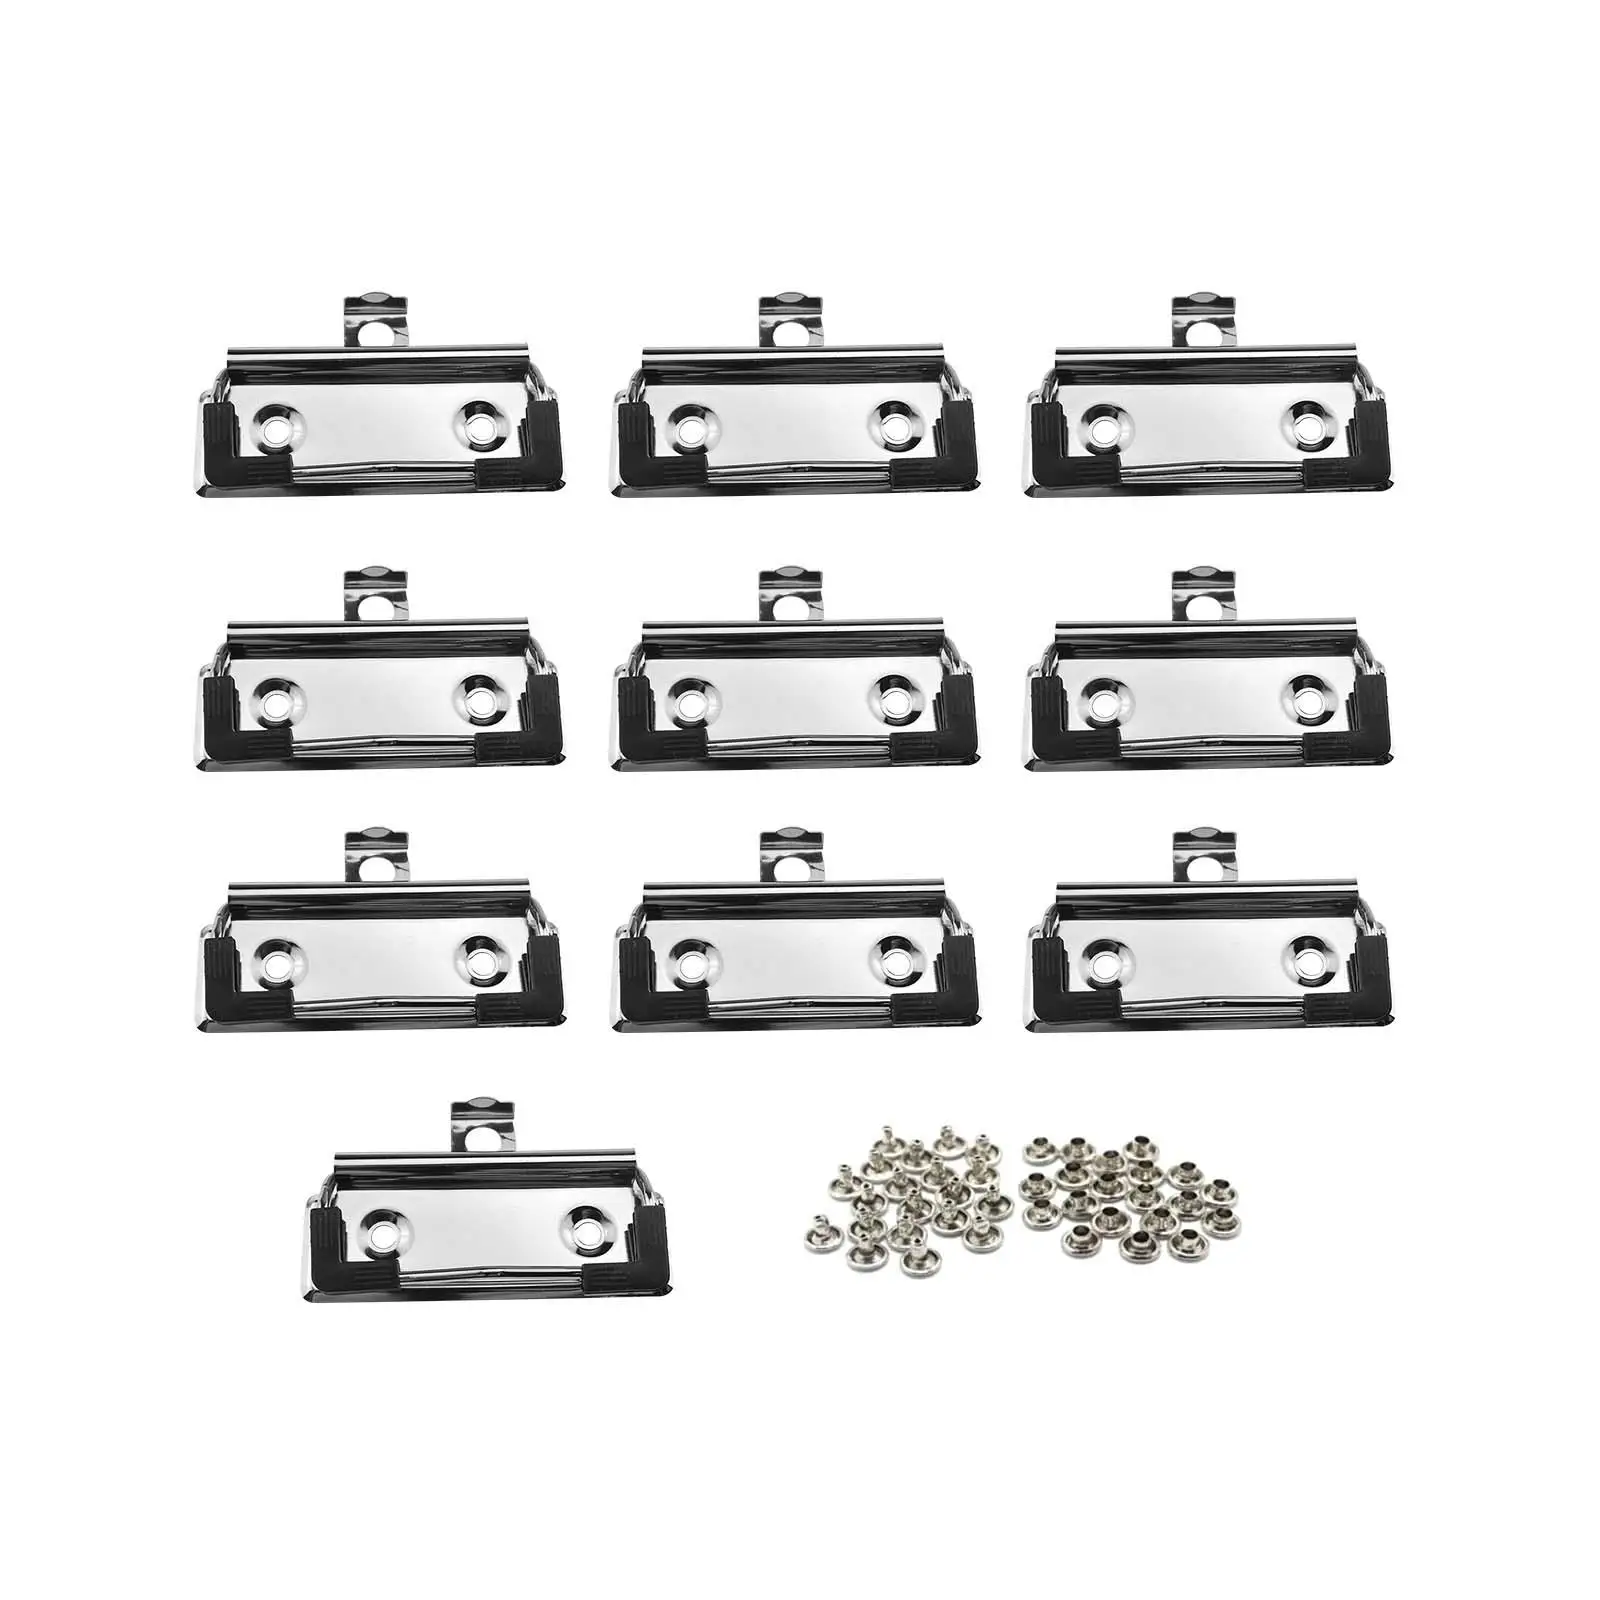 10 Pieces Clipboard Clips Mountable with Rubber Feet Hardboard Clips Spring Loaded Surface Mount Handle Hook for Office Supplies